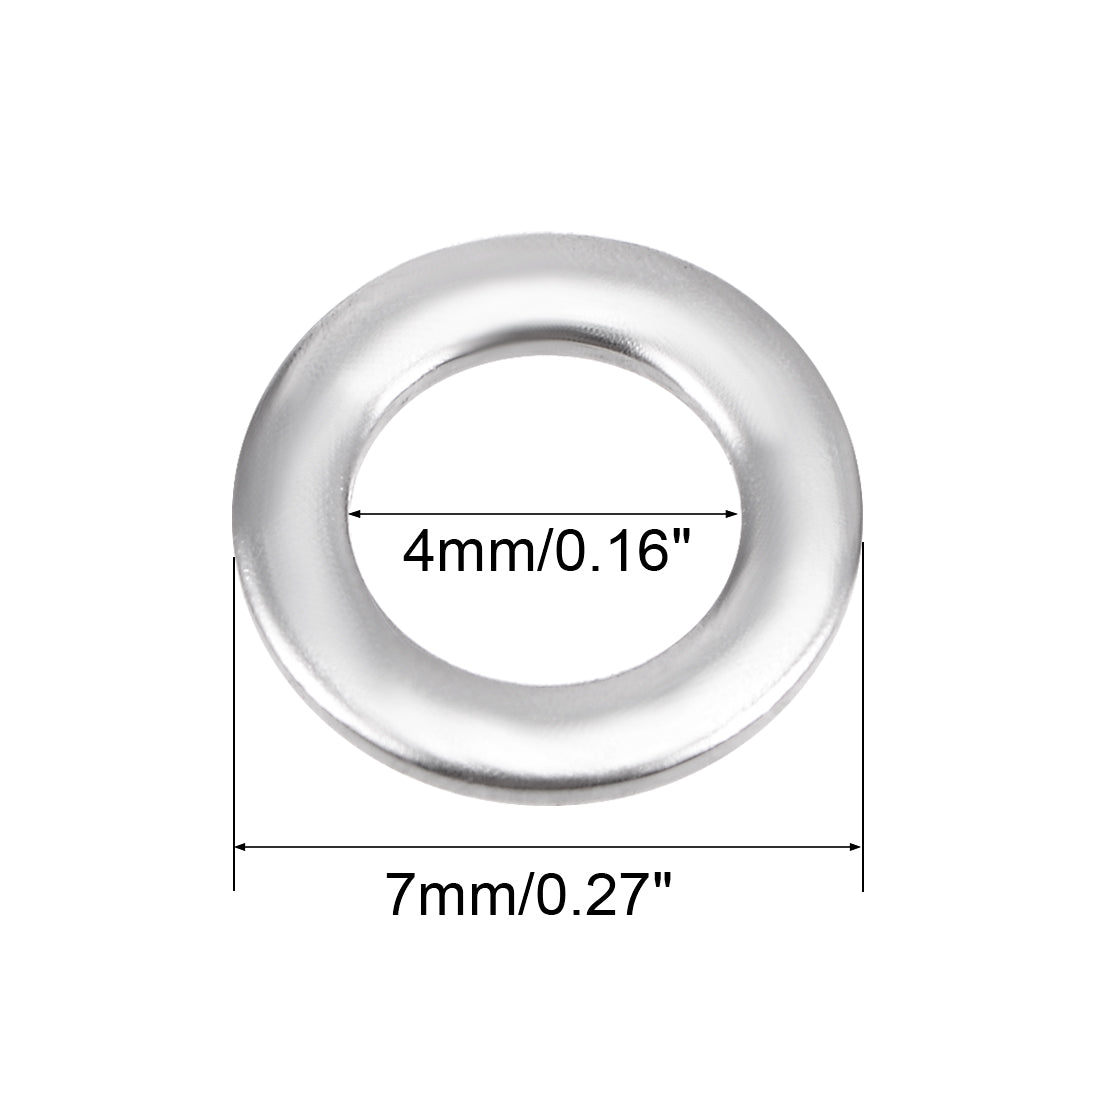 uxcell Uxcell 100 Pcs 7mm x 4mm x 0.8mm 304 Stainless Steel Flat Washer for Screw Bolt